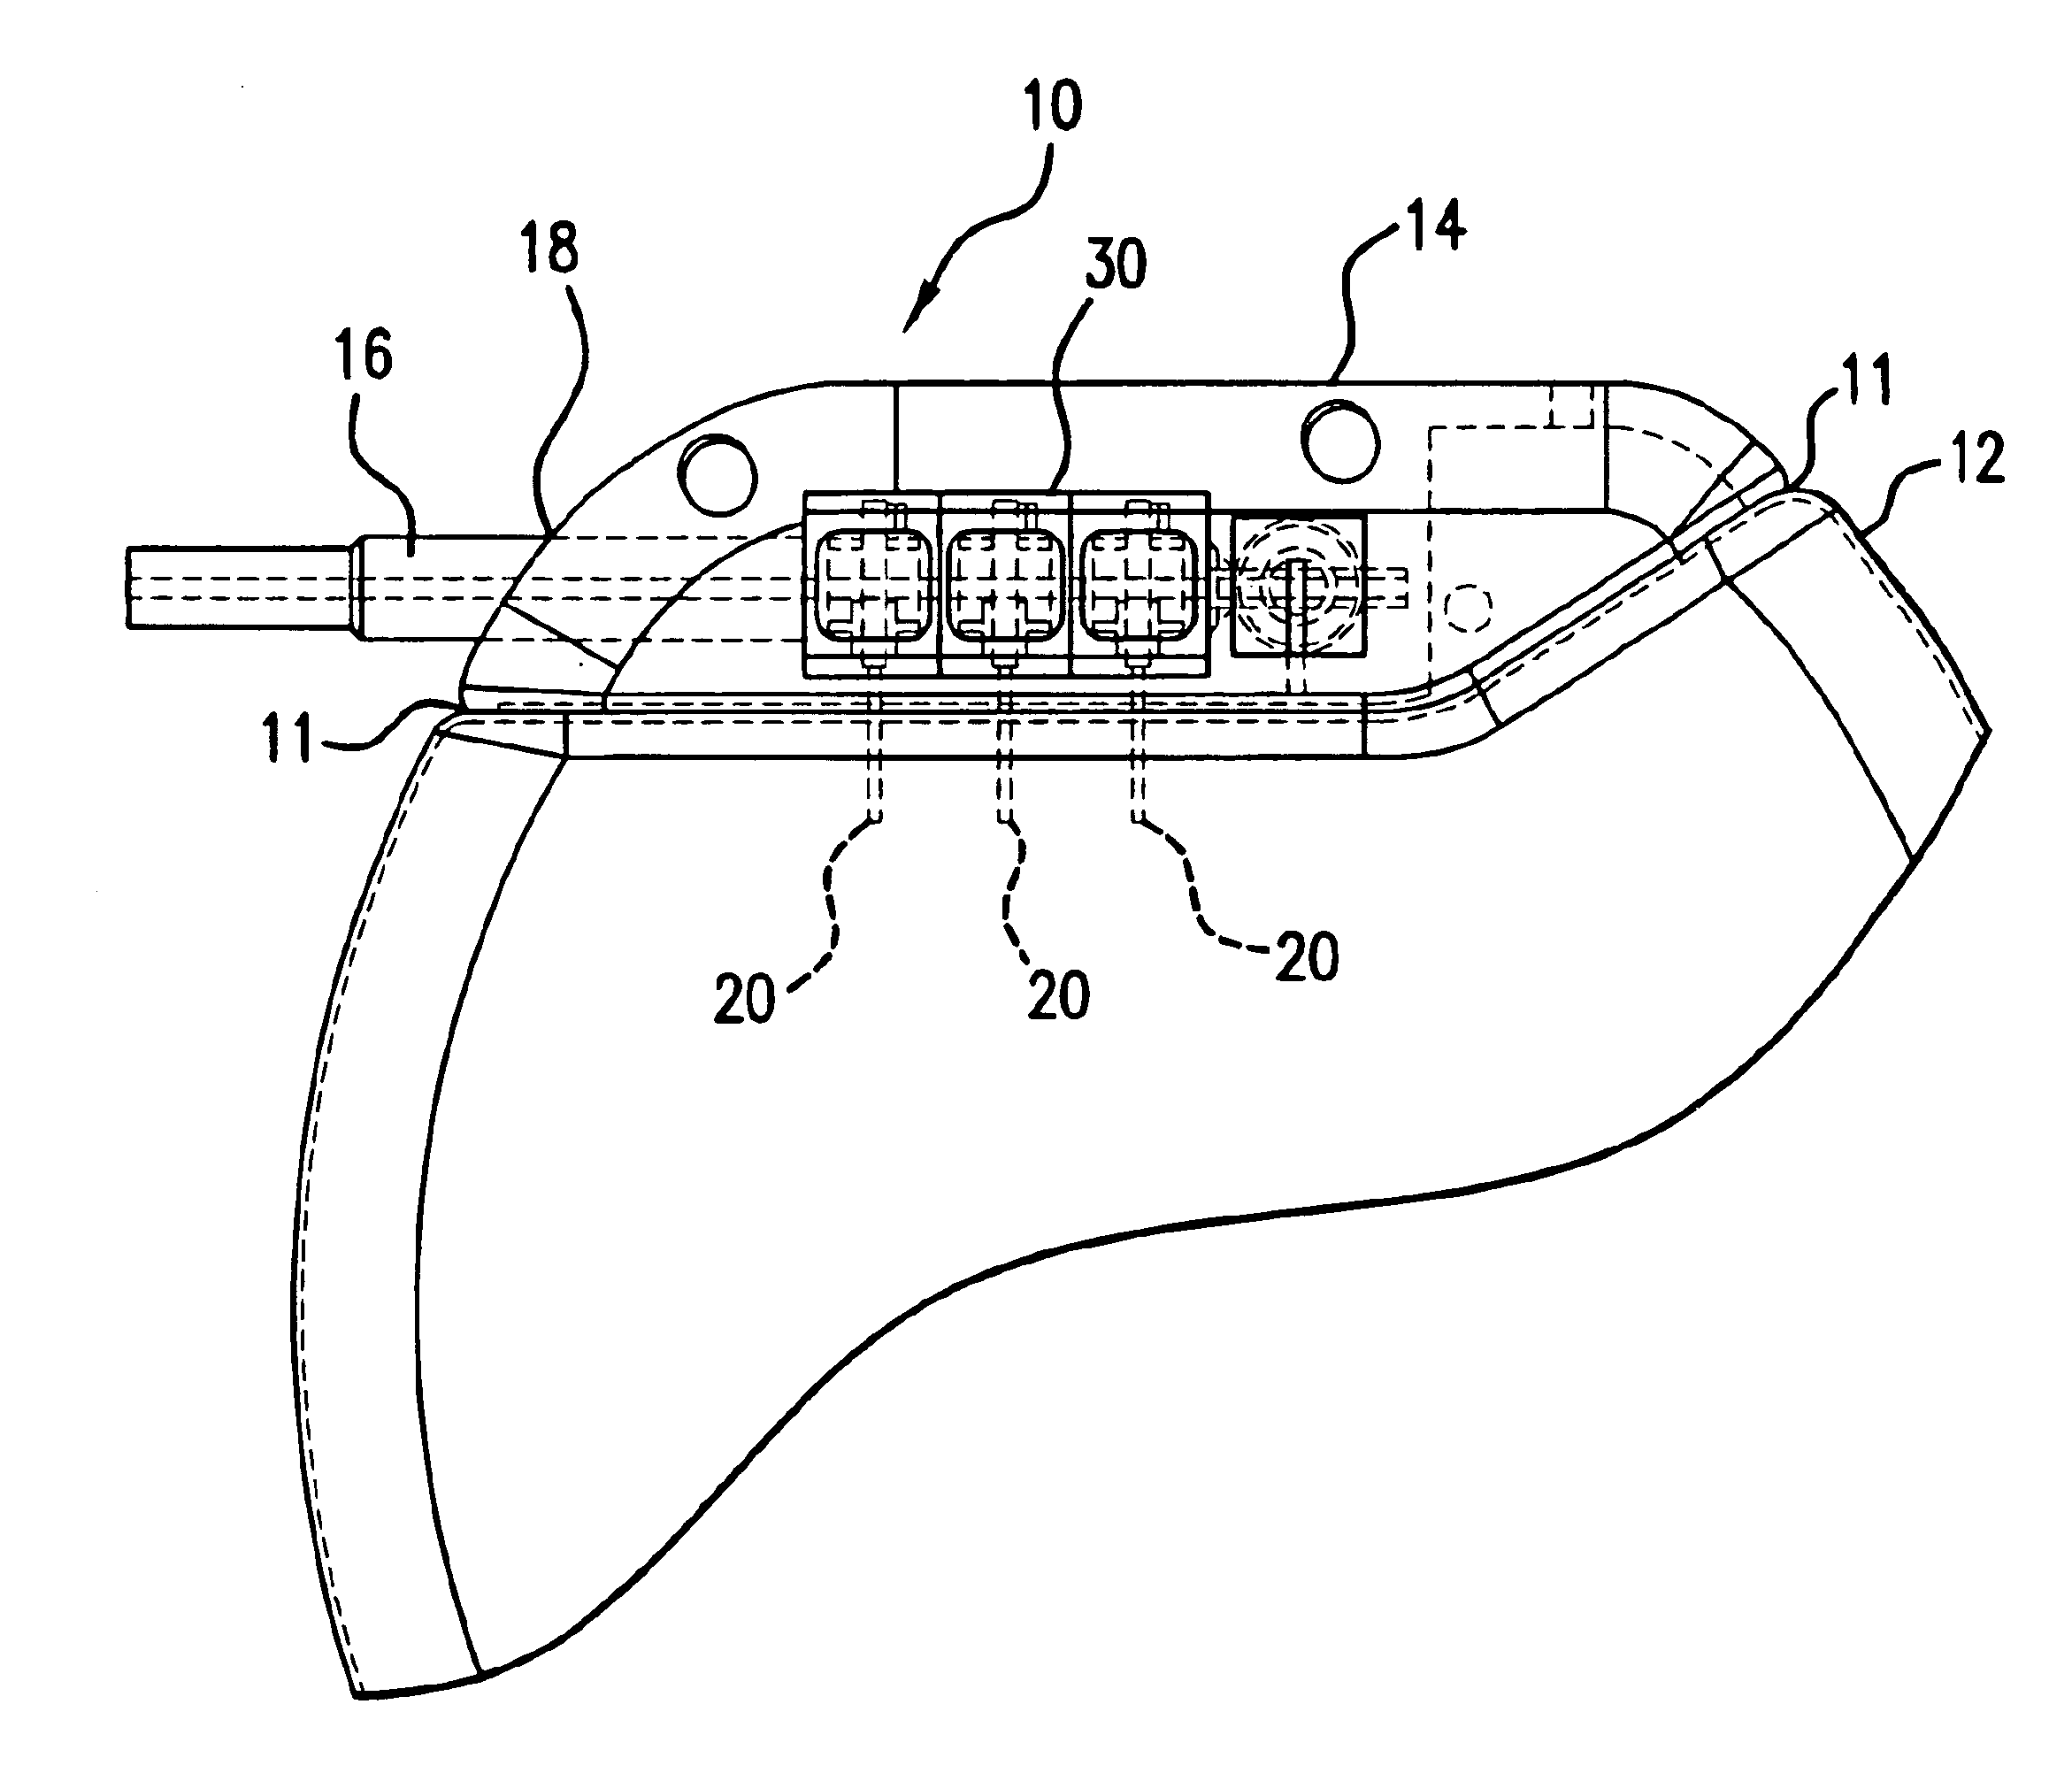 Connector apparatus for a medical device